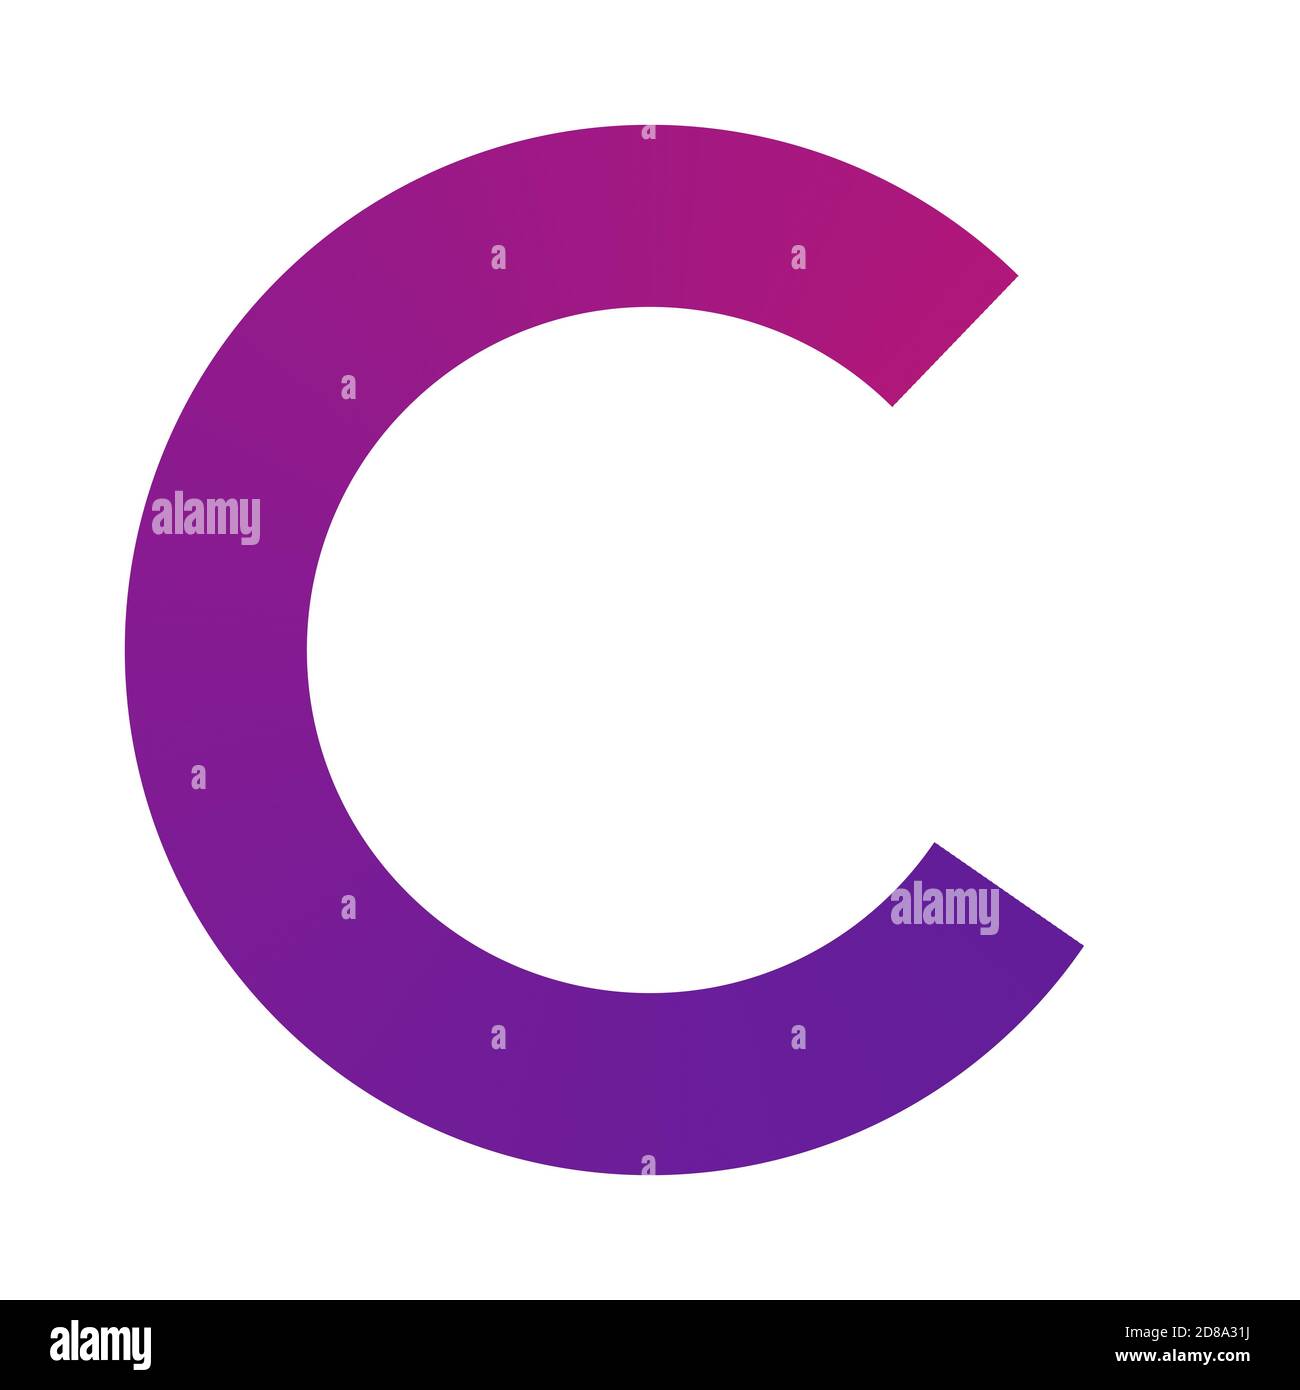 Capital letter C on white background, purple and pink gradient, logo for design. Stock Photo